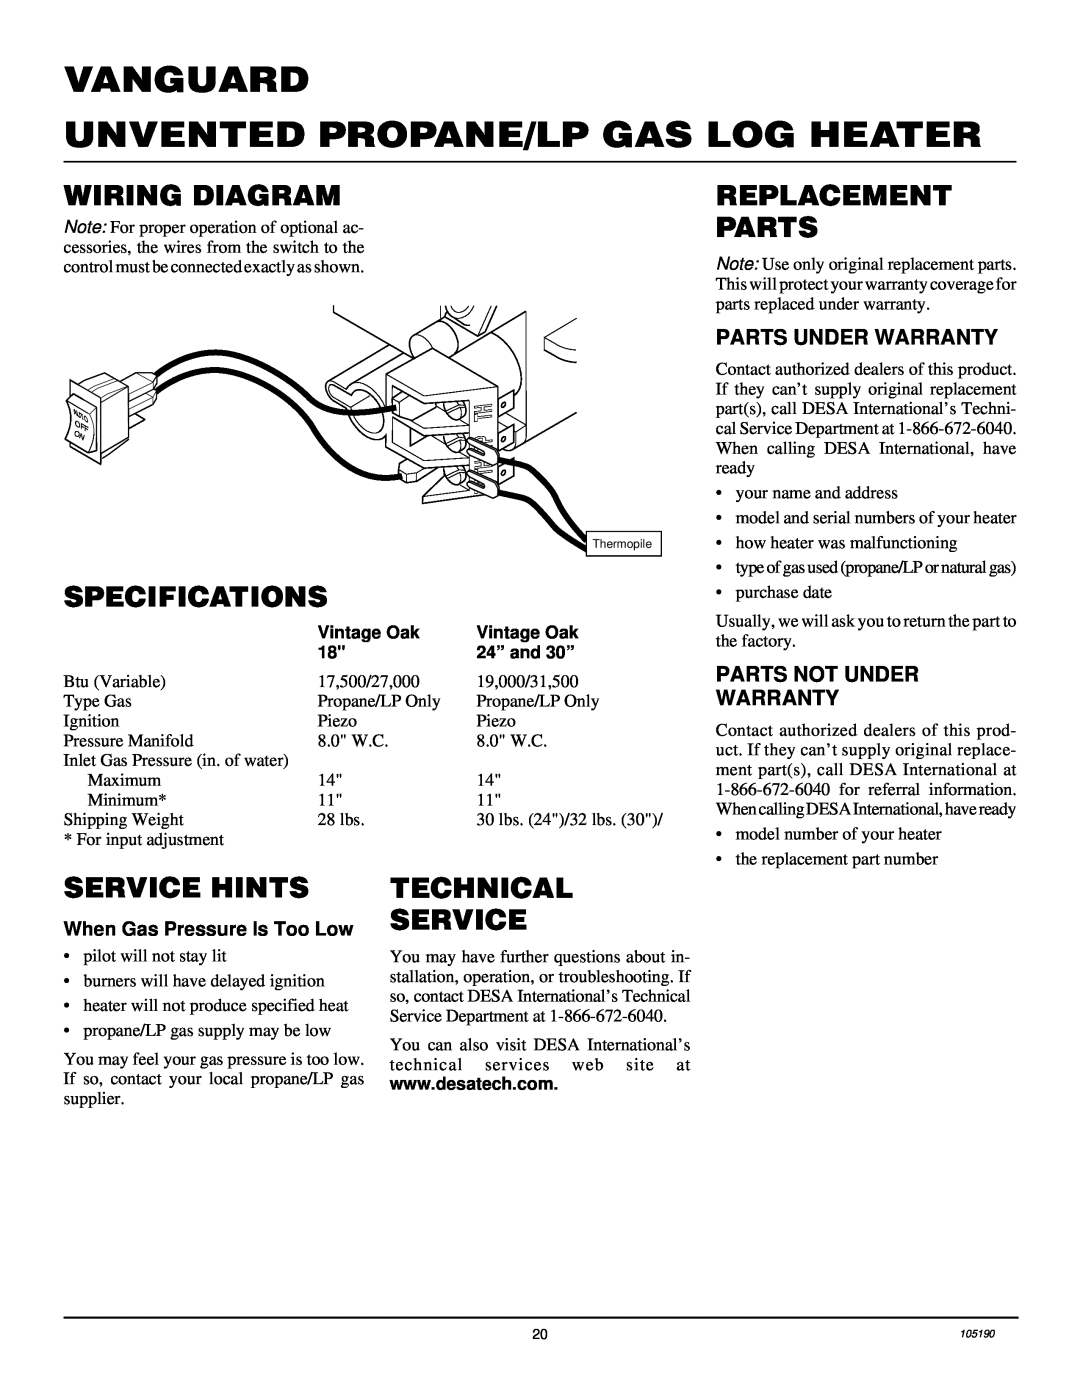 Vanguard Heating VYS18PWA, VYS24PWA Wiring Diagram, Specifications, Replacement Parts, Service Hints, Technical Service 